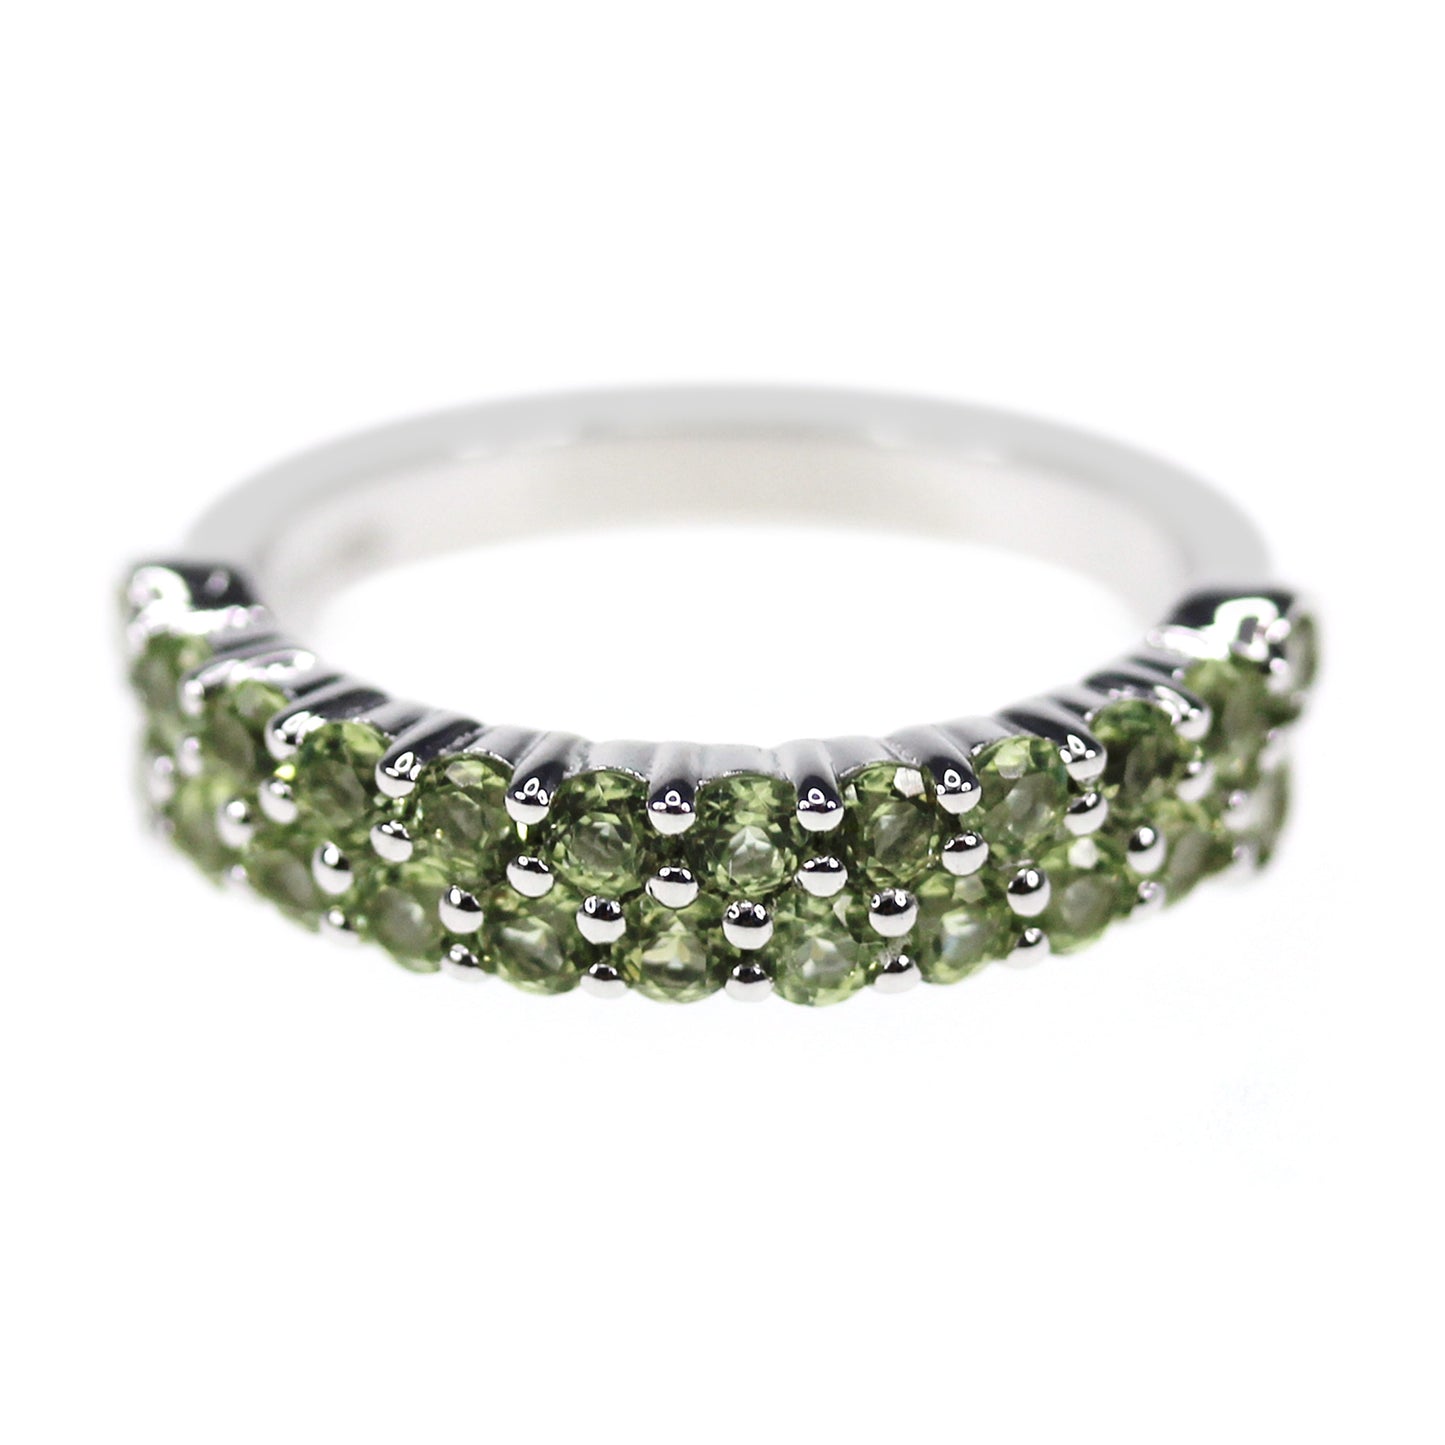 Rhodium Over Sterling Silver 1.2Ctw Peridot Band Ring - Pinctore